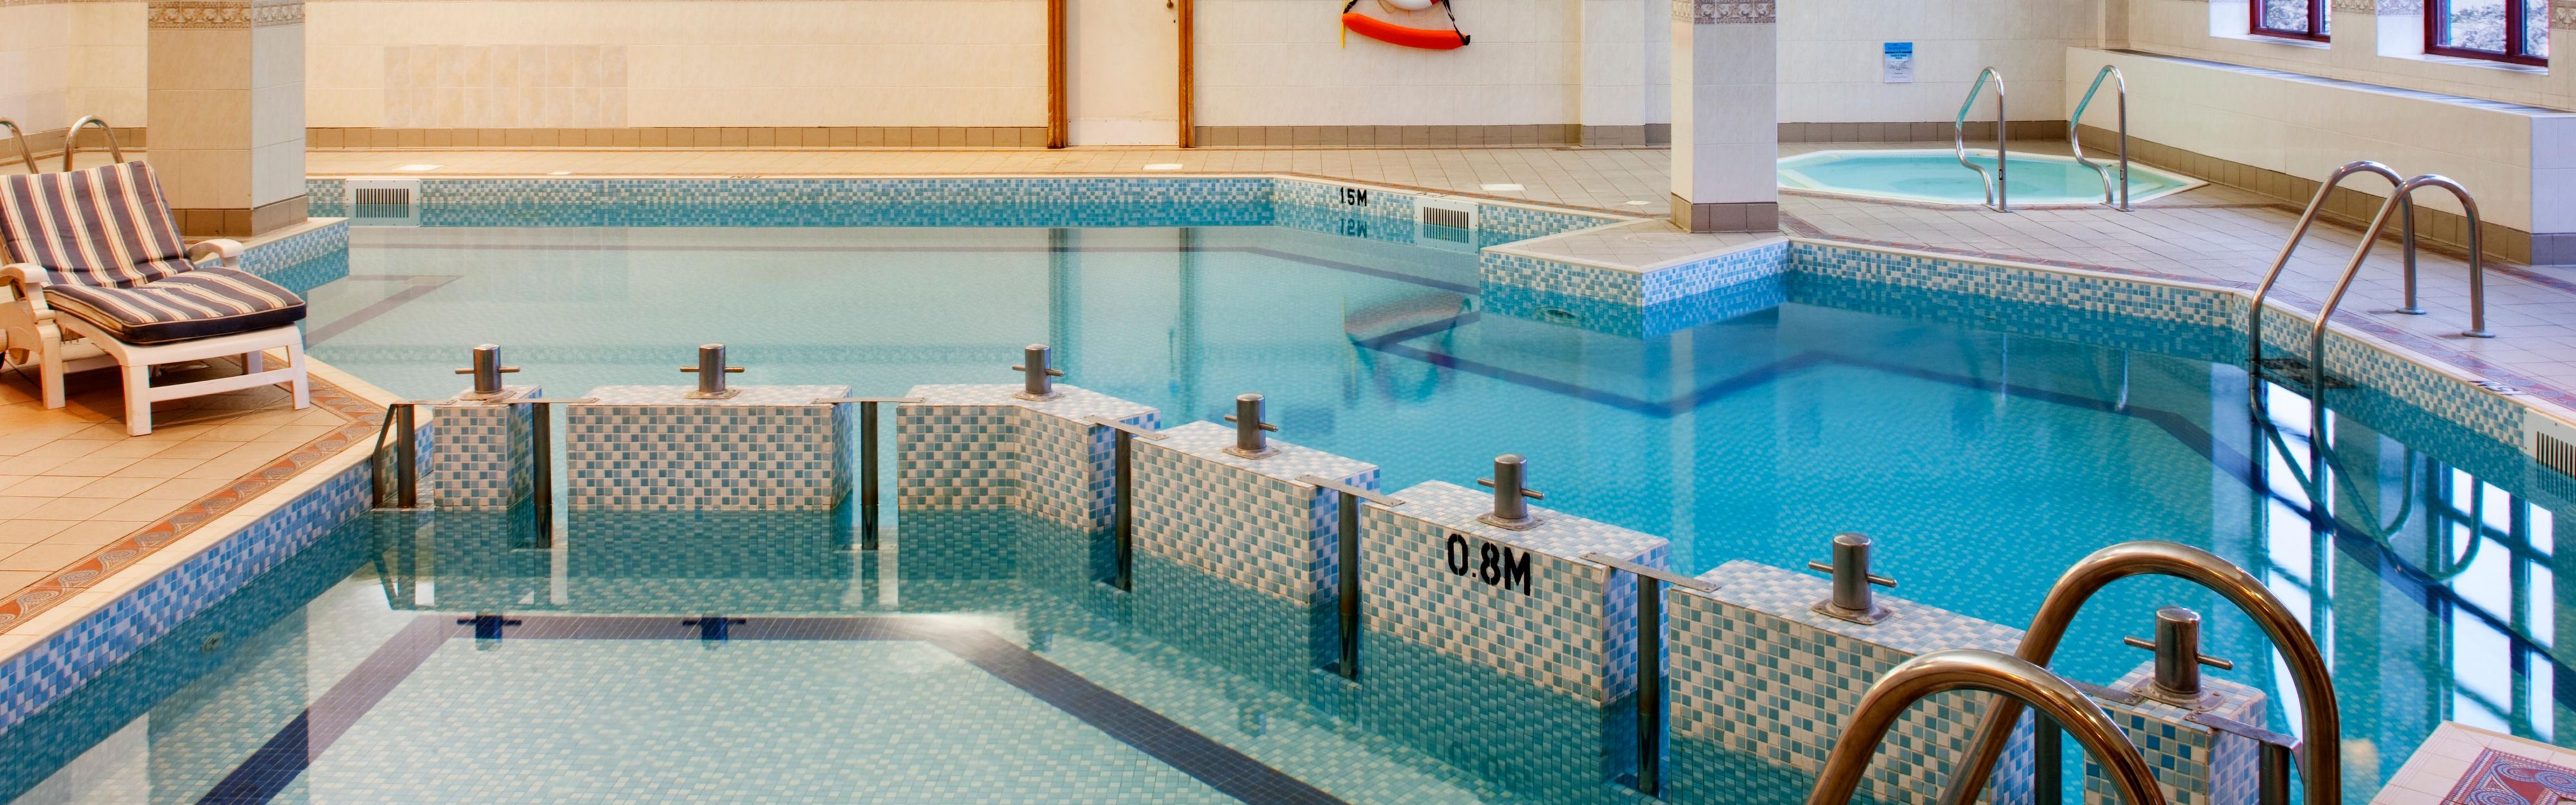 Take a dip in our heated indoor swimming pool.